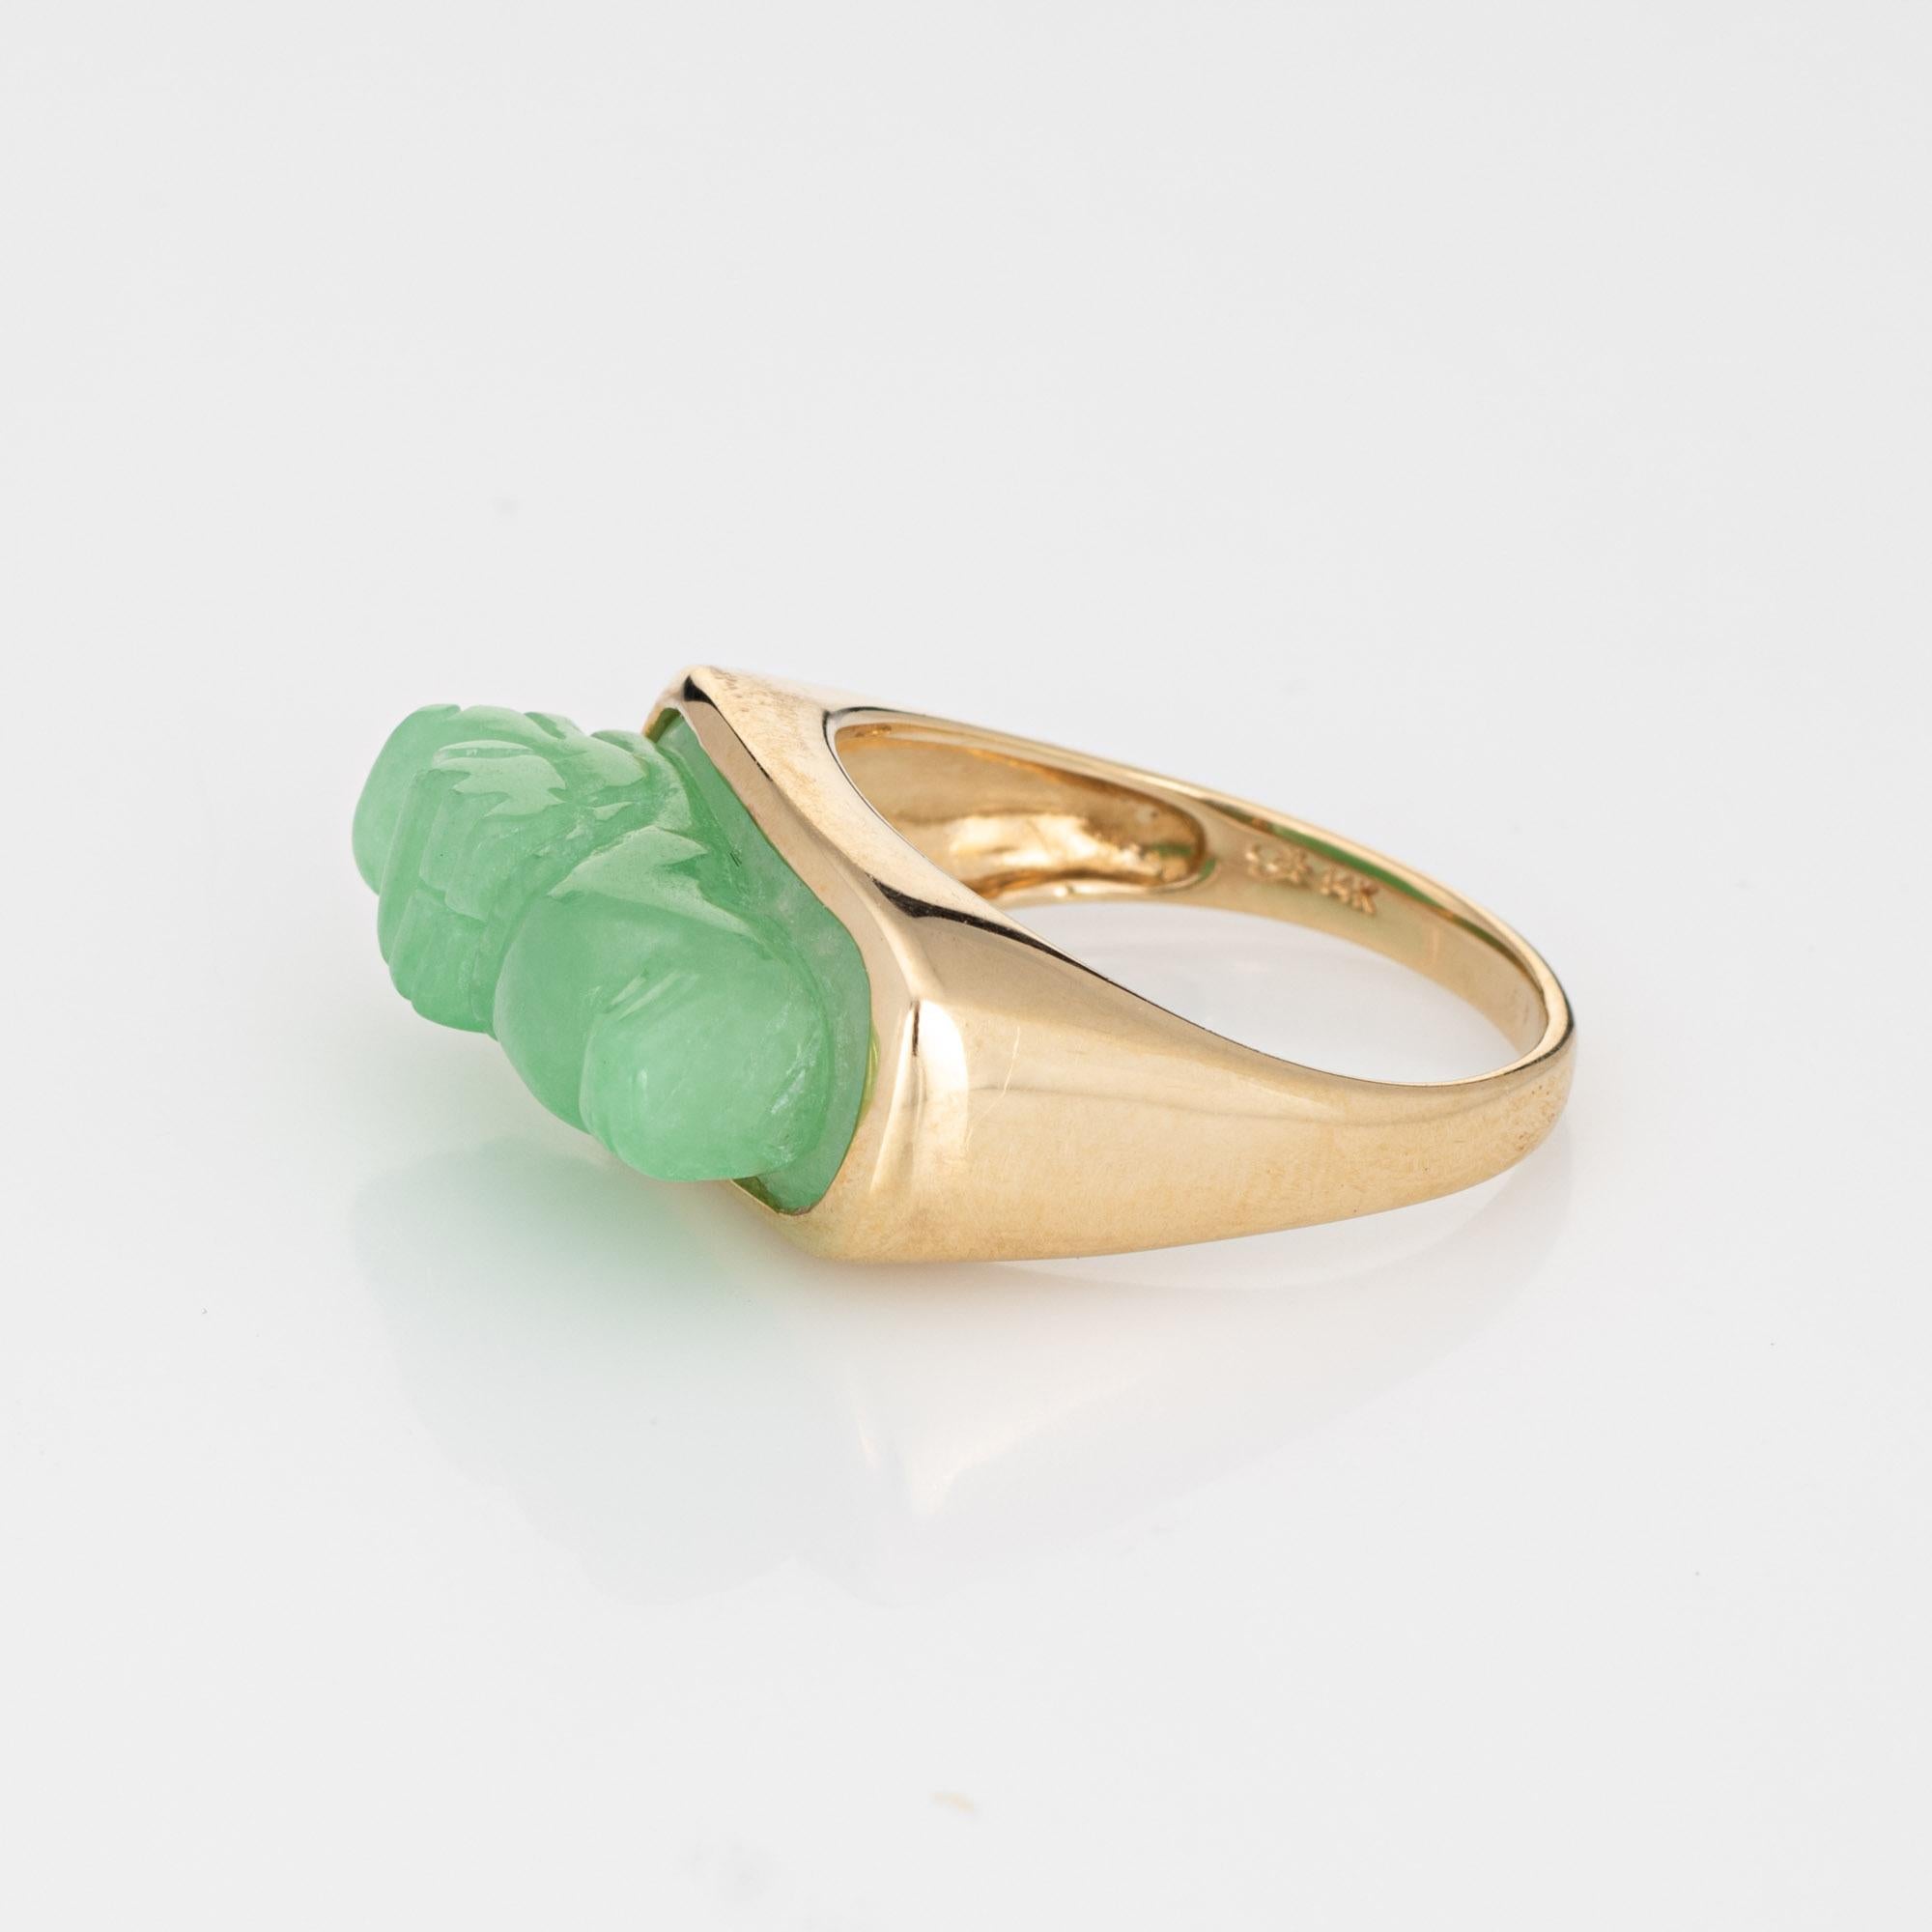 Modern Carved Jade Dragon Ring Vintage 14k Yellow Gold Estate Fine Jewelry